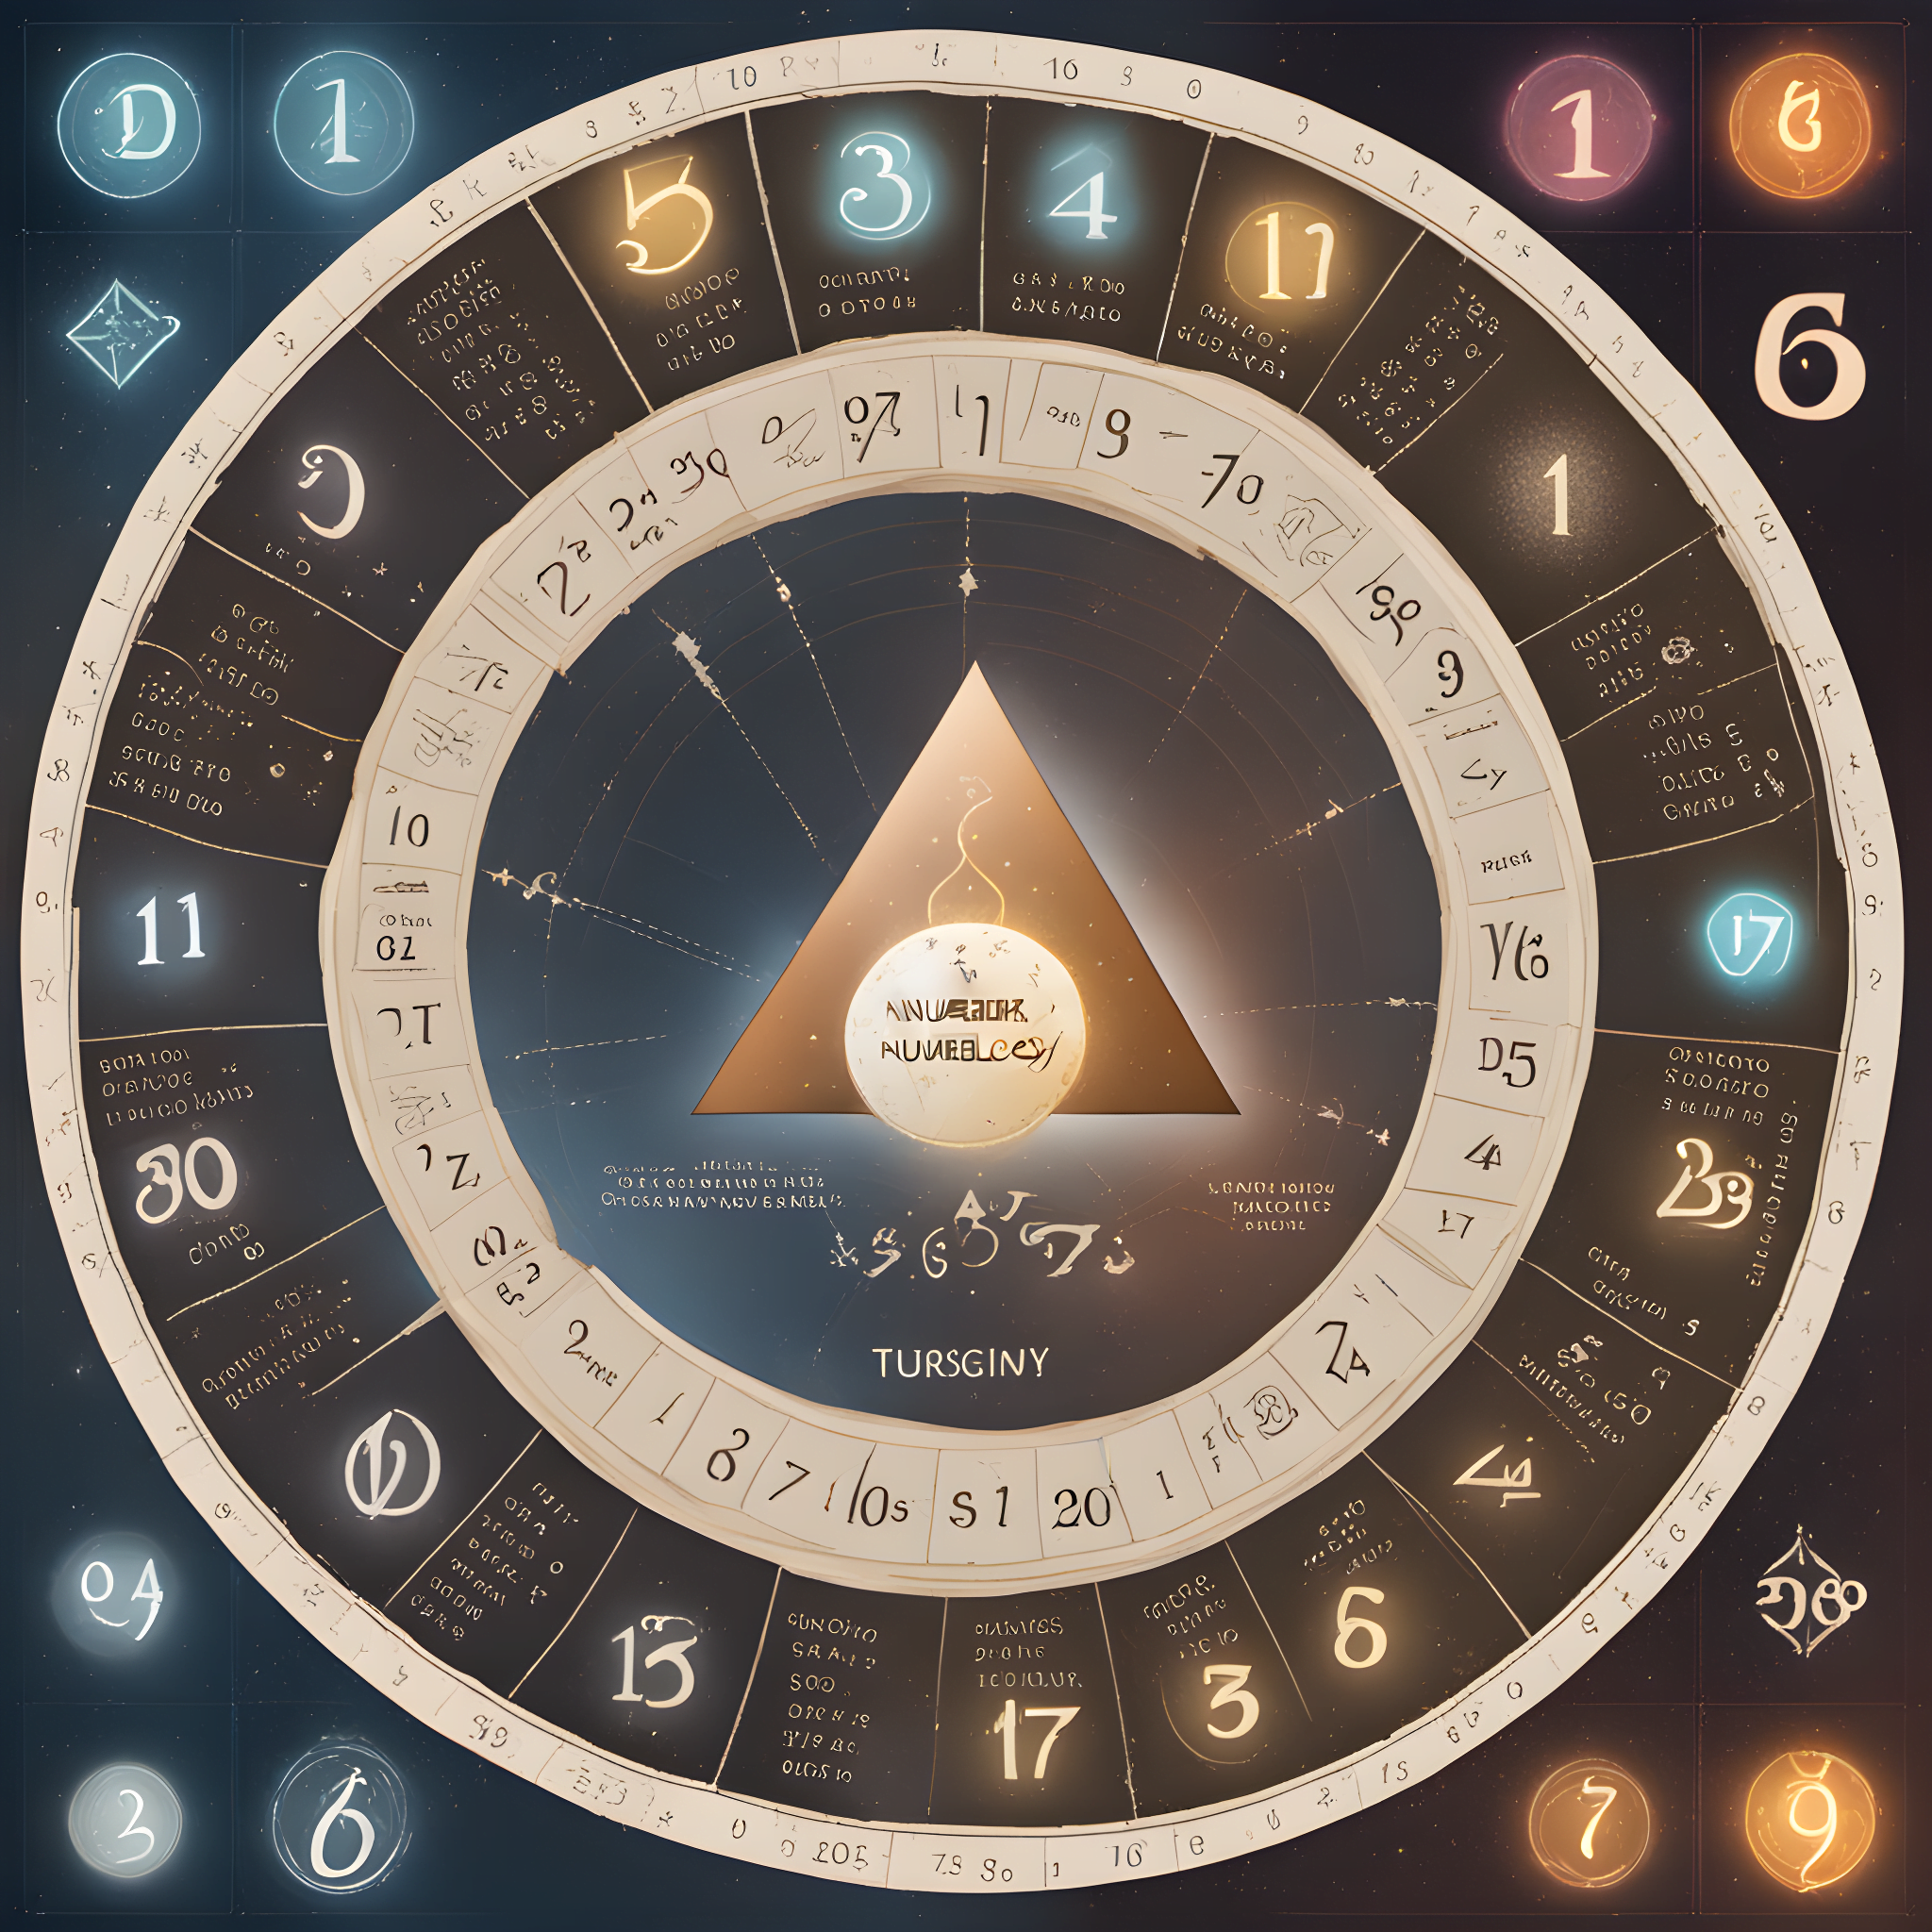 An image highlighting core Numerology numbers, including Life Path Number, Expression Number, and Destiny Number, each accompanied by its corresponding icon and a brief description.